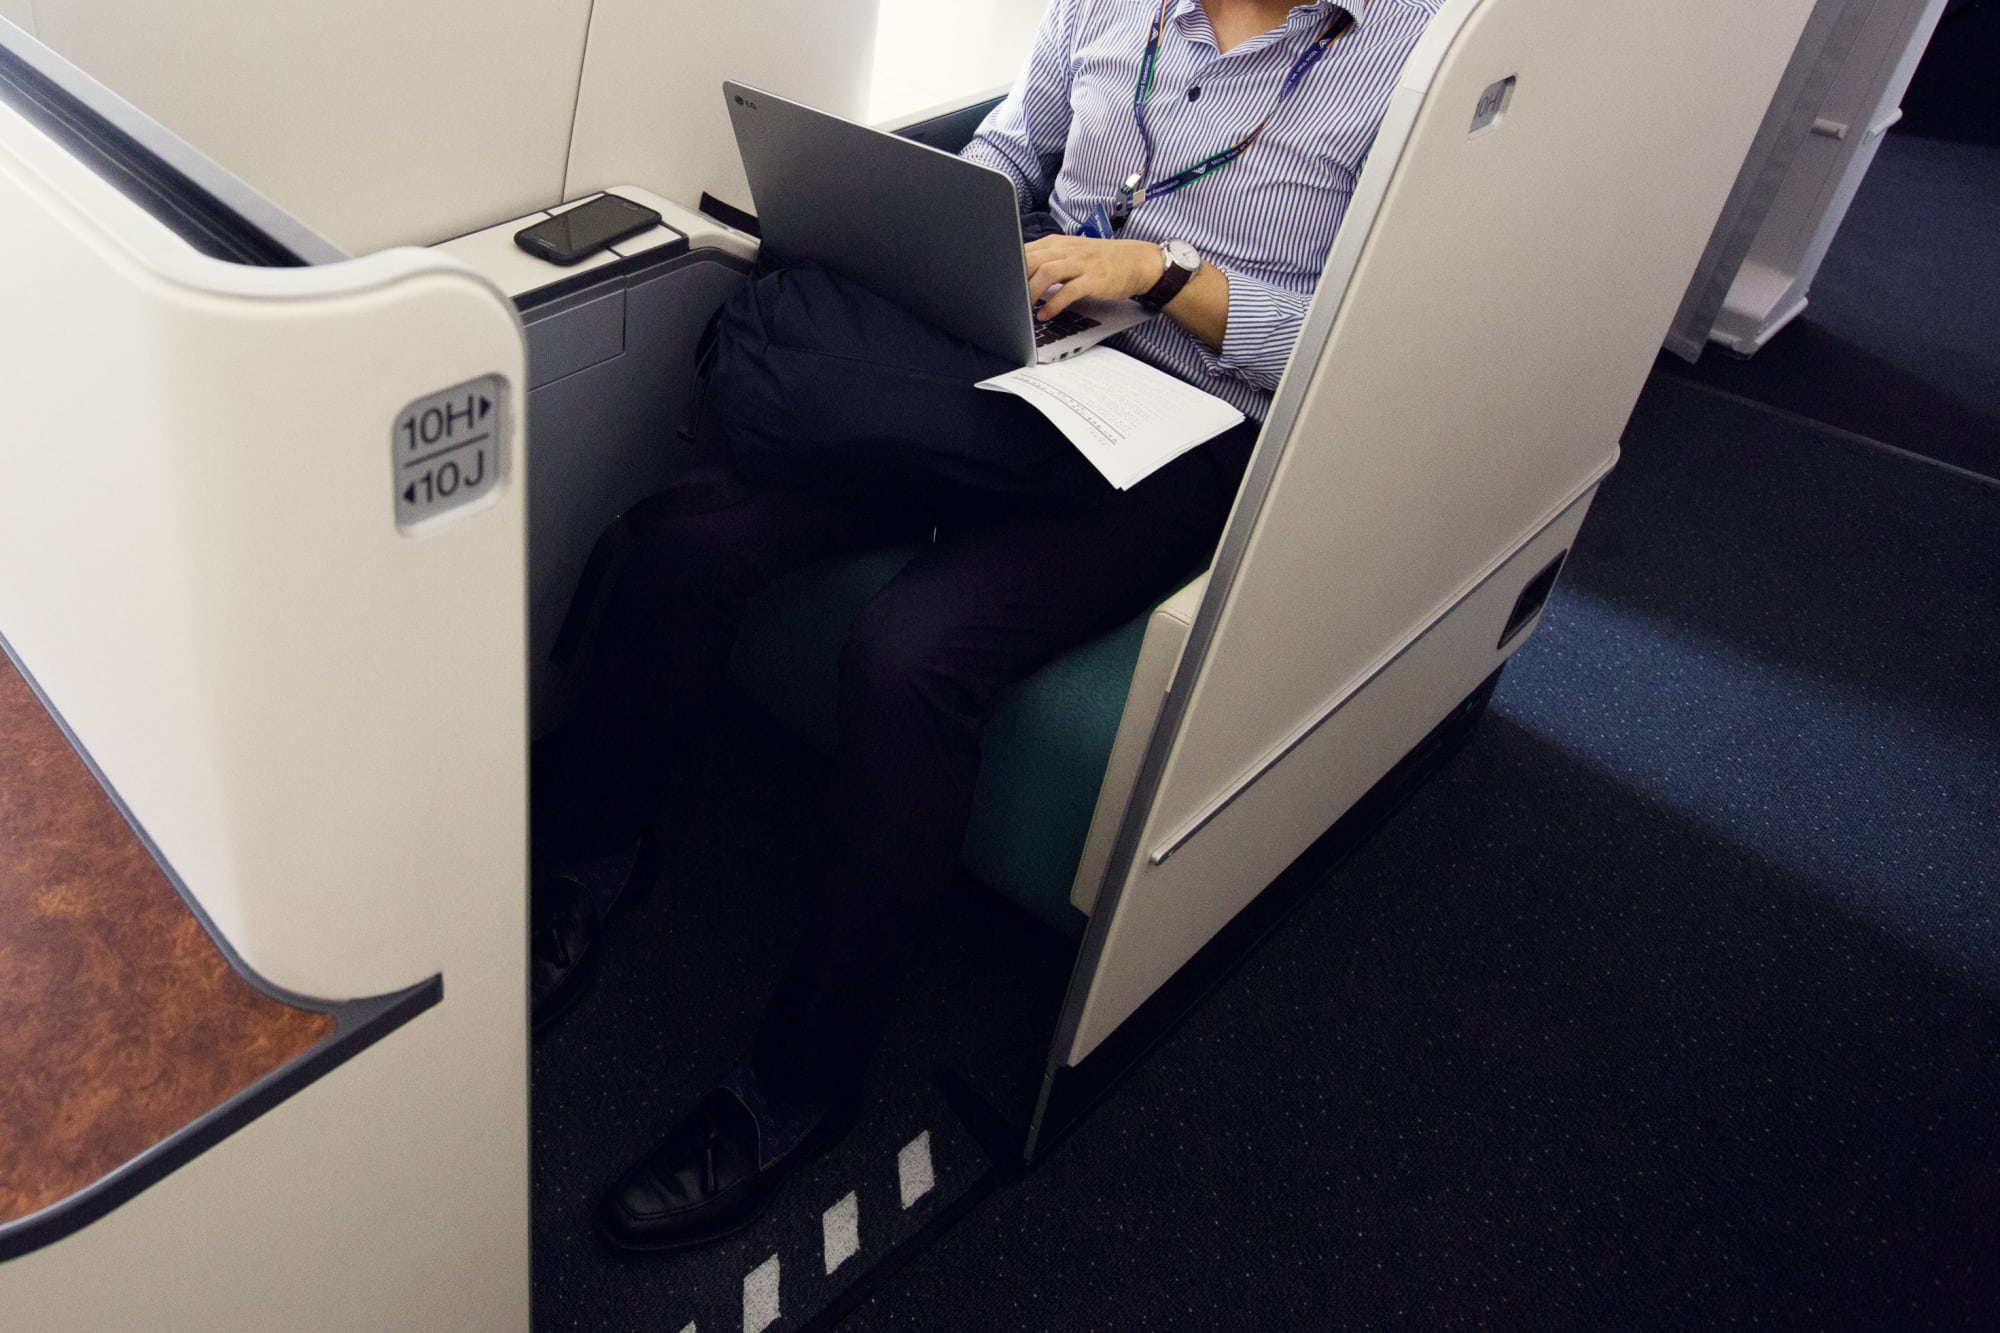 A laptop ban is slated to hit Europe-to-U.S. flights soon. A laptop being used in first class on a flight is pictured here.